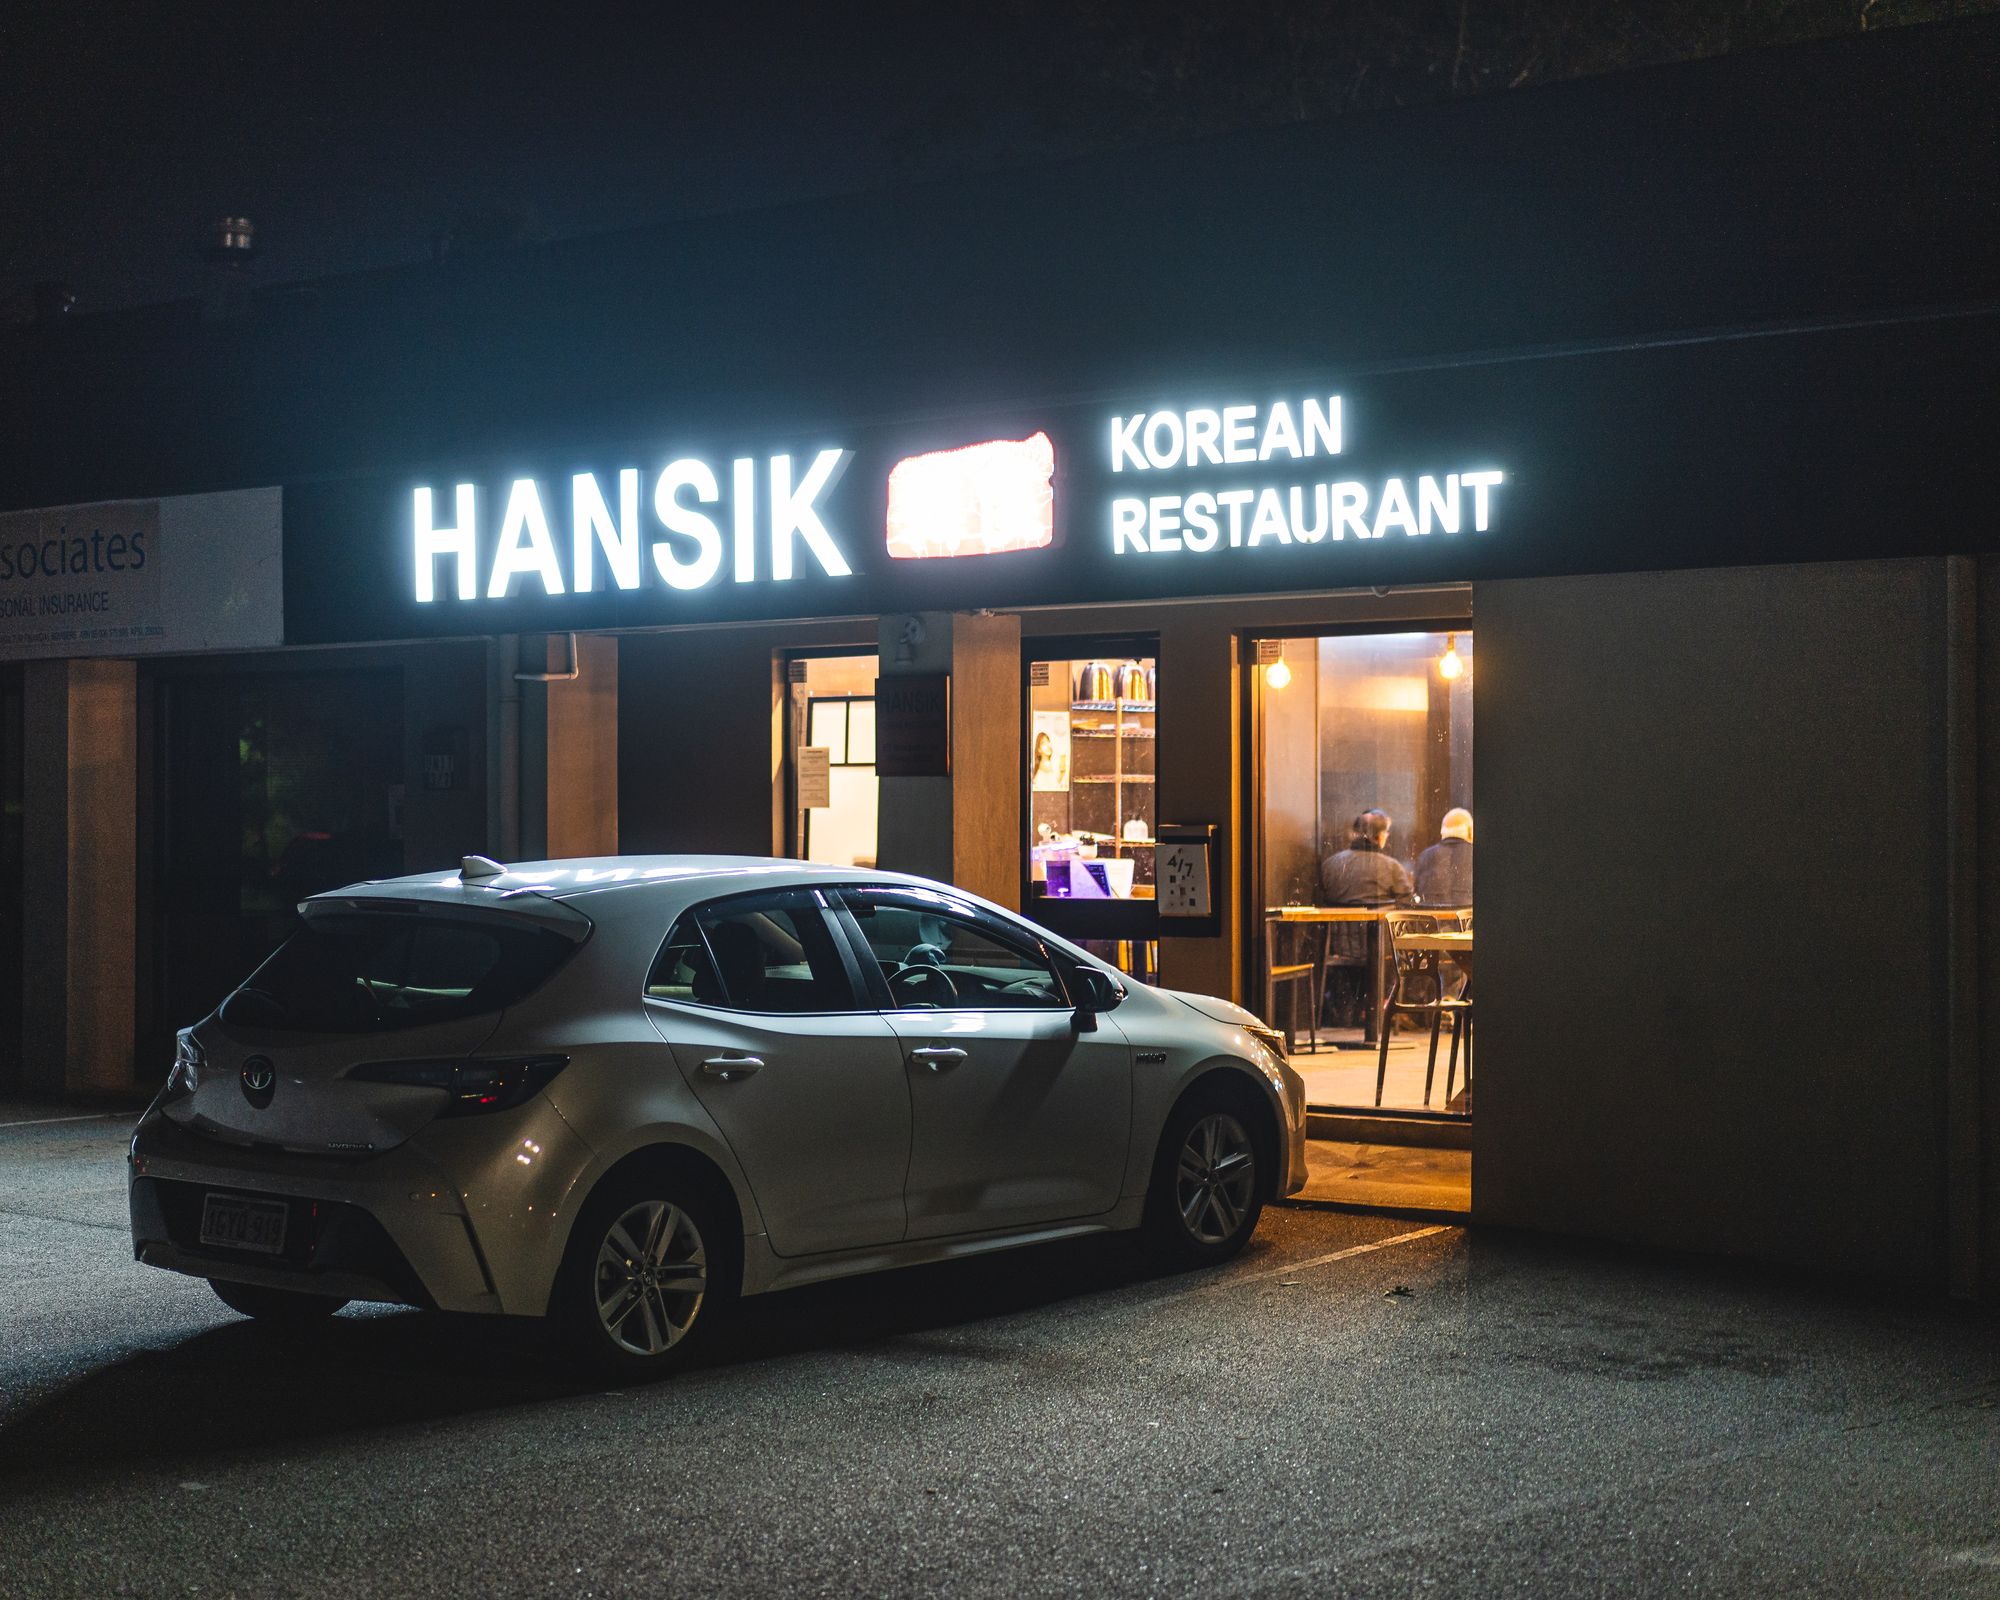 Exterior shot of a restaurant with a car outside, illuminated by the restaurant sign and the restaurant interior